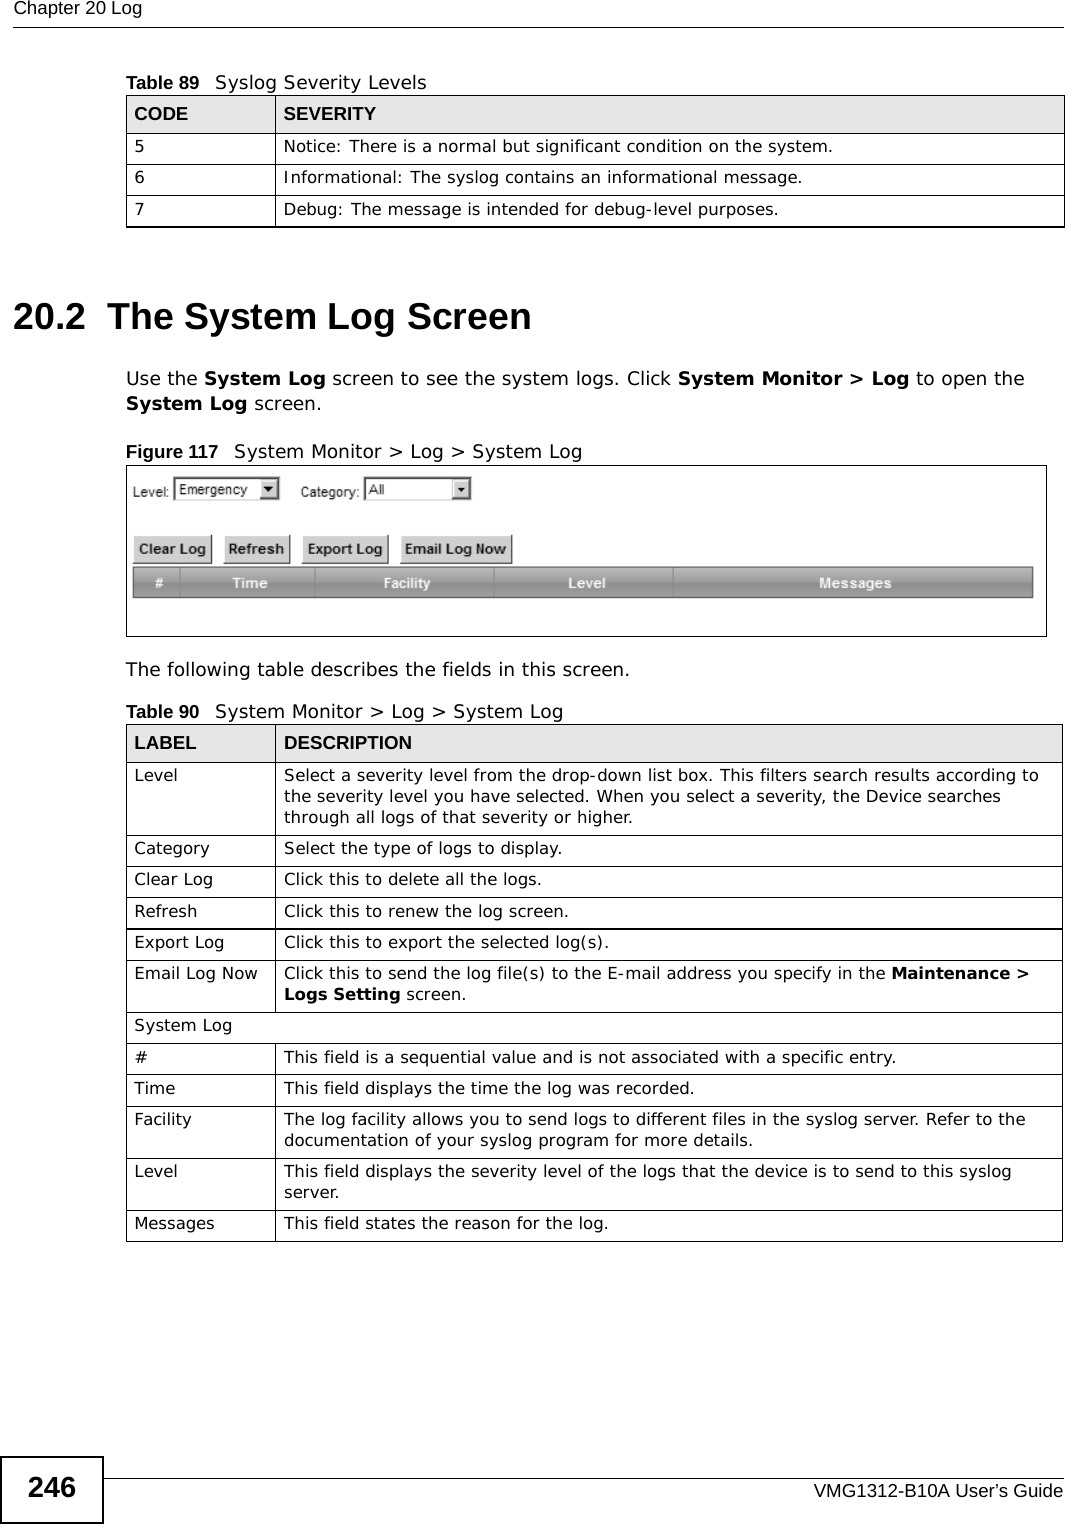 Chapter 20 LogVMG1312-B10A User’s Guide24620.2  The System Log Screen Use the System Log screen to see the system logs. Click System Monitor &gt; Log to open the System Log screen. Figure 117   System Monitor &gt; Log &gt; System LogThe following table describes the fields in this screen.   5 Notice: There is a normal but significant condition on the system.6 Informational: The syslog contains an informational message.7 Debug: The message is intended for debug-level purposes.Table 89   Syslog Severity LevelsCODE SEVERITYTable 90   System Monitor &gt; Log &gt; System LogLABEL DESCRIPTIONLevel Select a severity level from the drop-down list box. This filters search results according to the severity level you have selected. When you select a severity, the Device searches through all logs of that severity or higher. Category Select the type of logs to display.Clear Log  Click this to delete all the logs. Refresh Click this to renew the log screen. Export Log Click this to export the selected log(s).Email Log Now Click this to send the log file(s) to the E-mail address you specify in the Maintenance &gt; Logs Setting screen.System Log#This field is a sequential value and is not associated with a specific entry.Time  This field displays the time the log was recorded. Facility  The log facility allows you to send logs to different files in the syslog server. Refer to the documentation of your syslog program for more details.Level This field displays the severity level of the logs that the device is to send to this syslog server.Messages This field states the reason for the log.